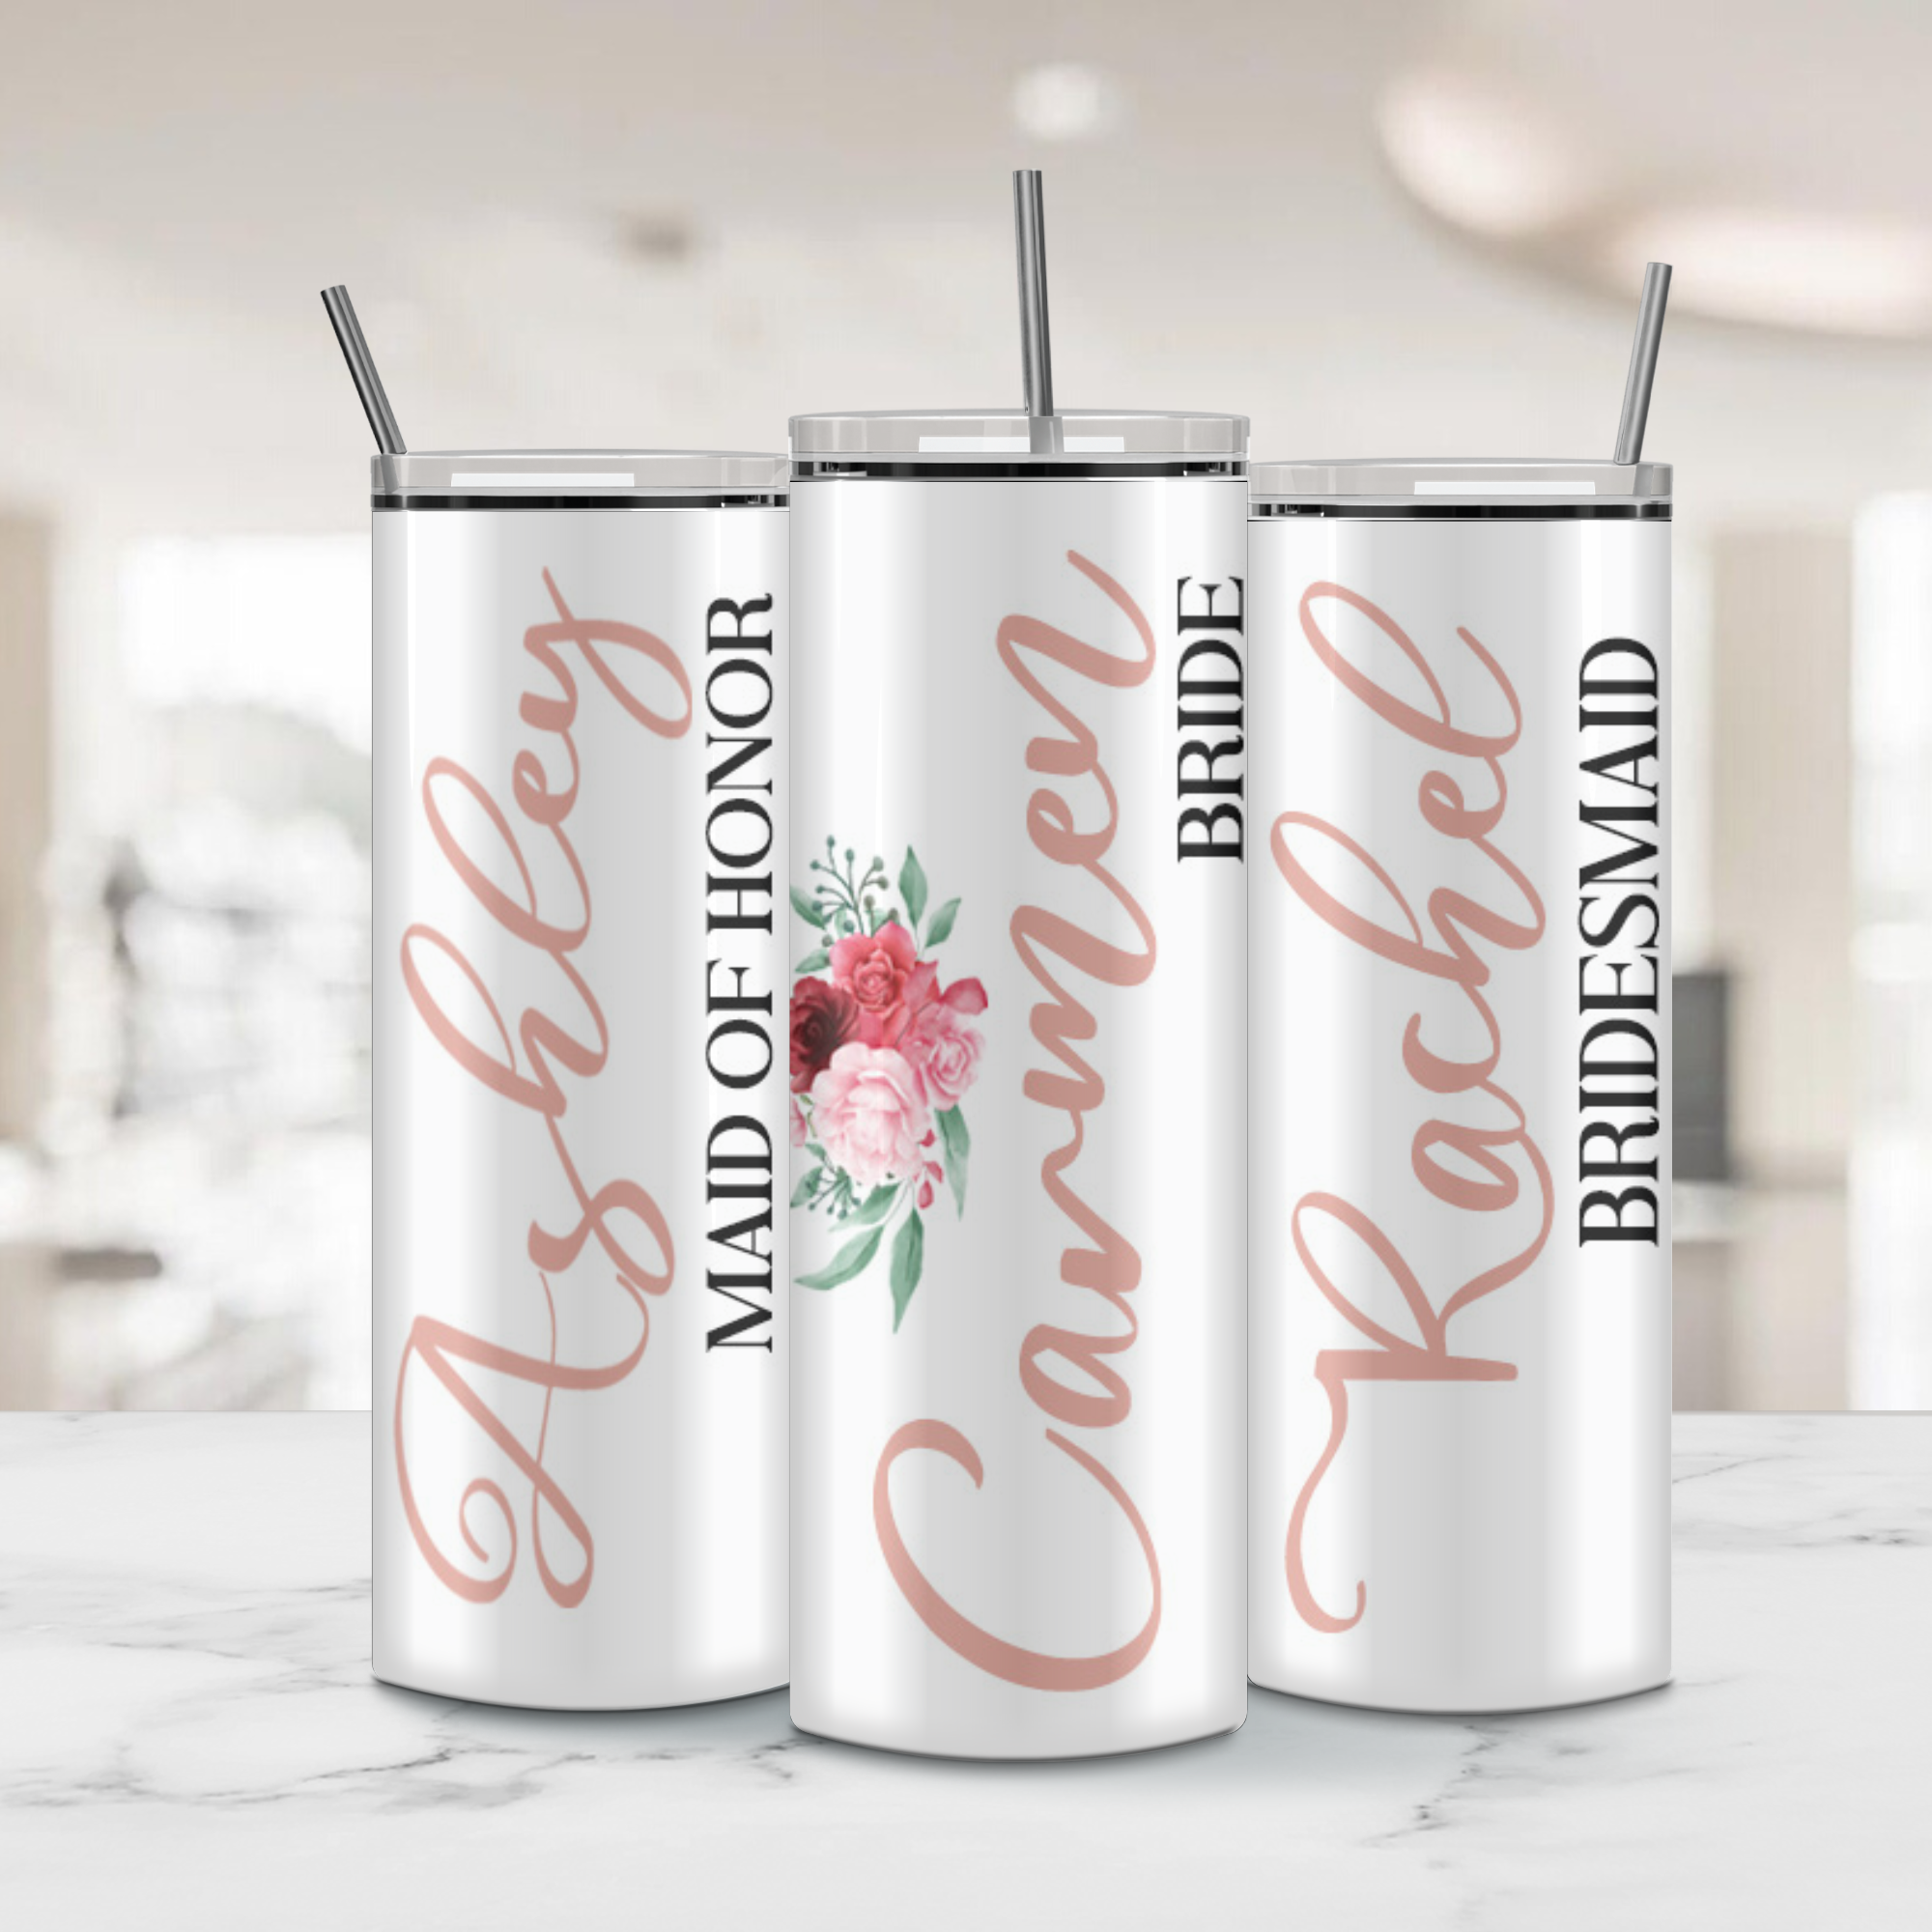 Custom Bridal Party Tumblers for Bride, Bridesmaid, Maid of Honor, Flower Girl & More from BluChi